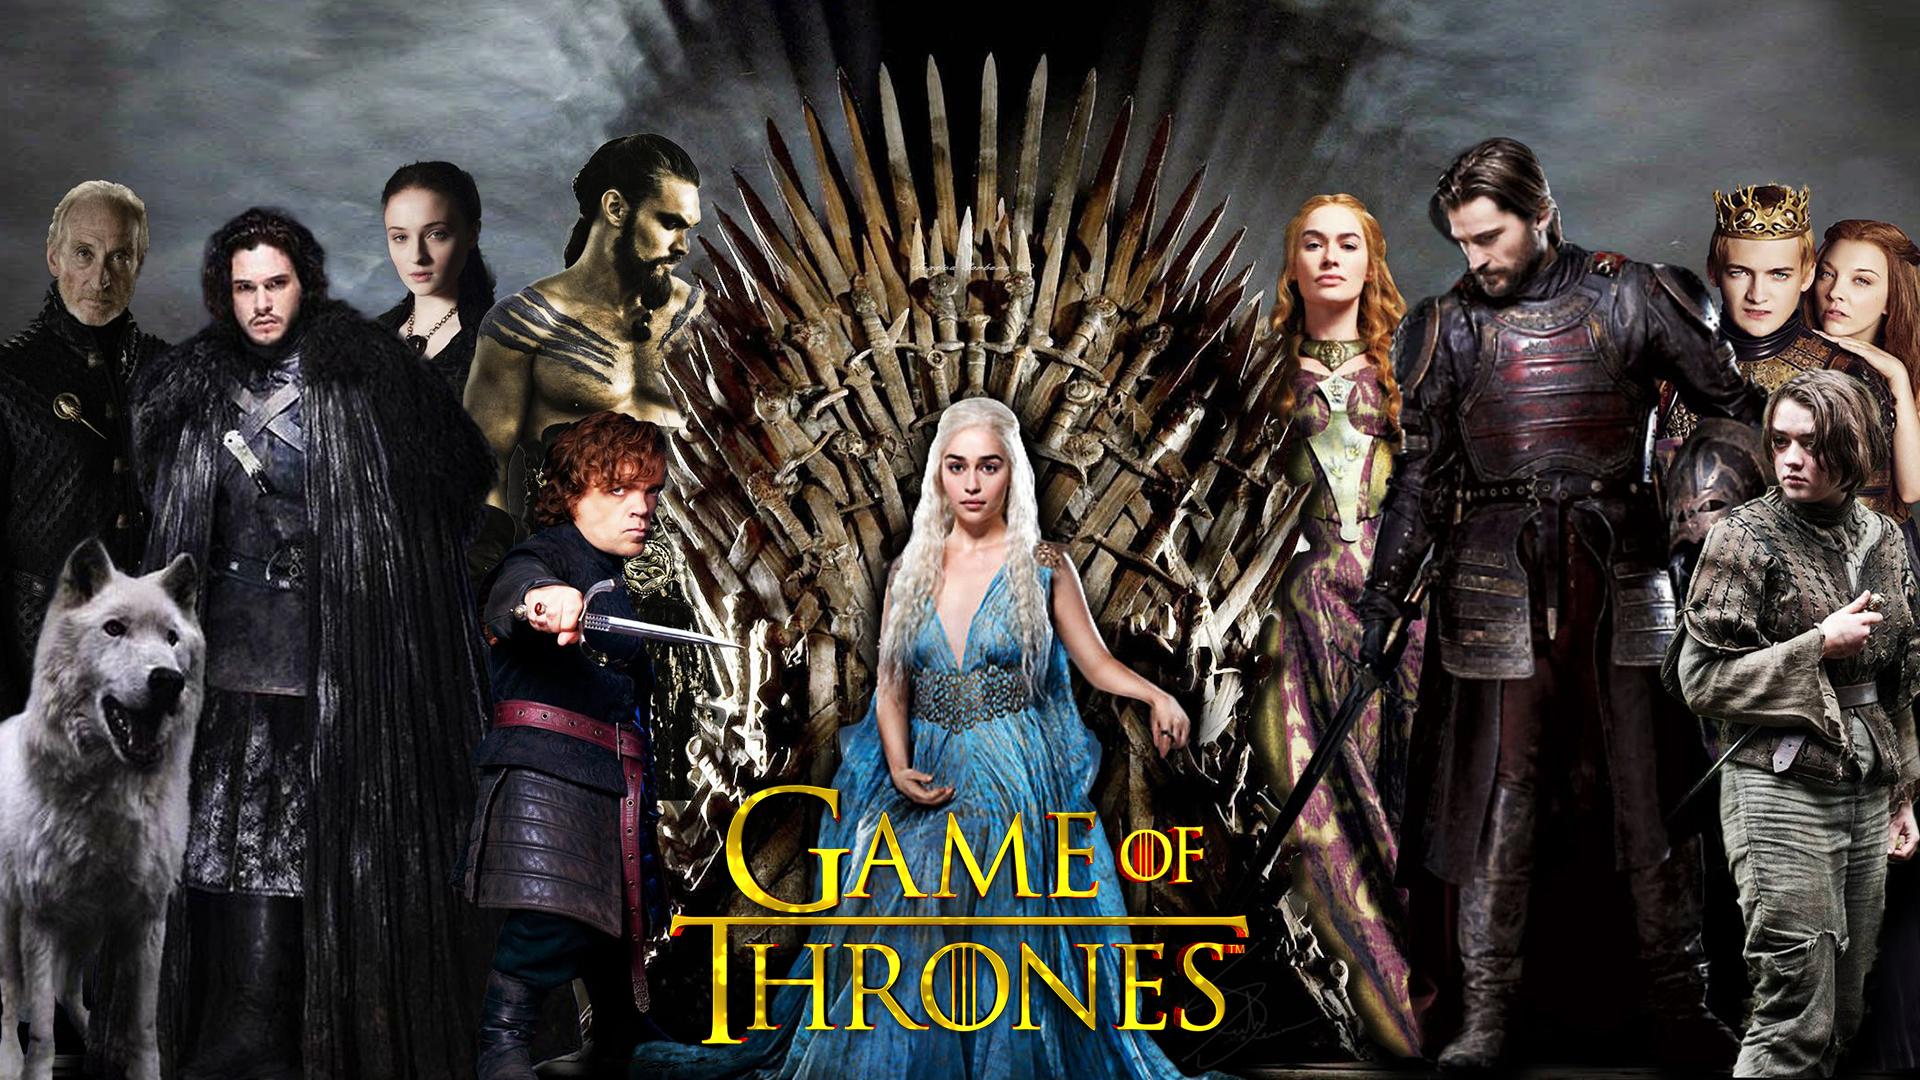 Selfie with Game of Thrones Characters for Android - APK Download